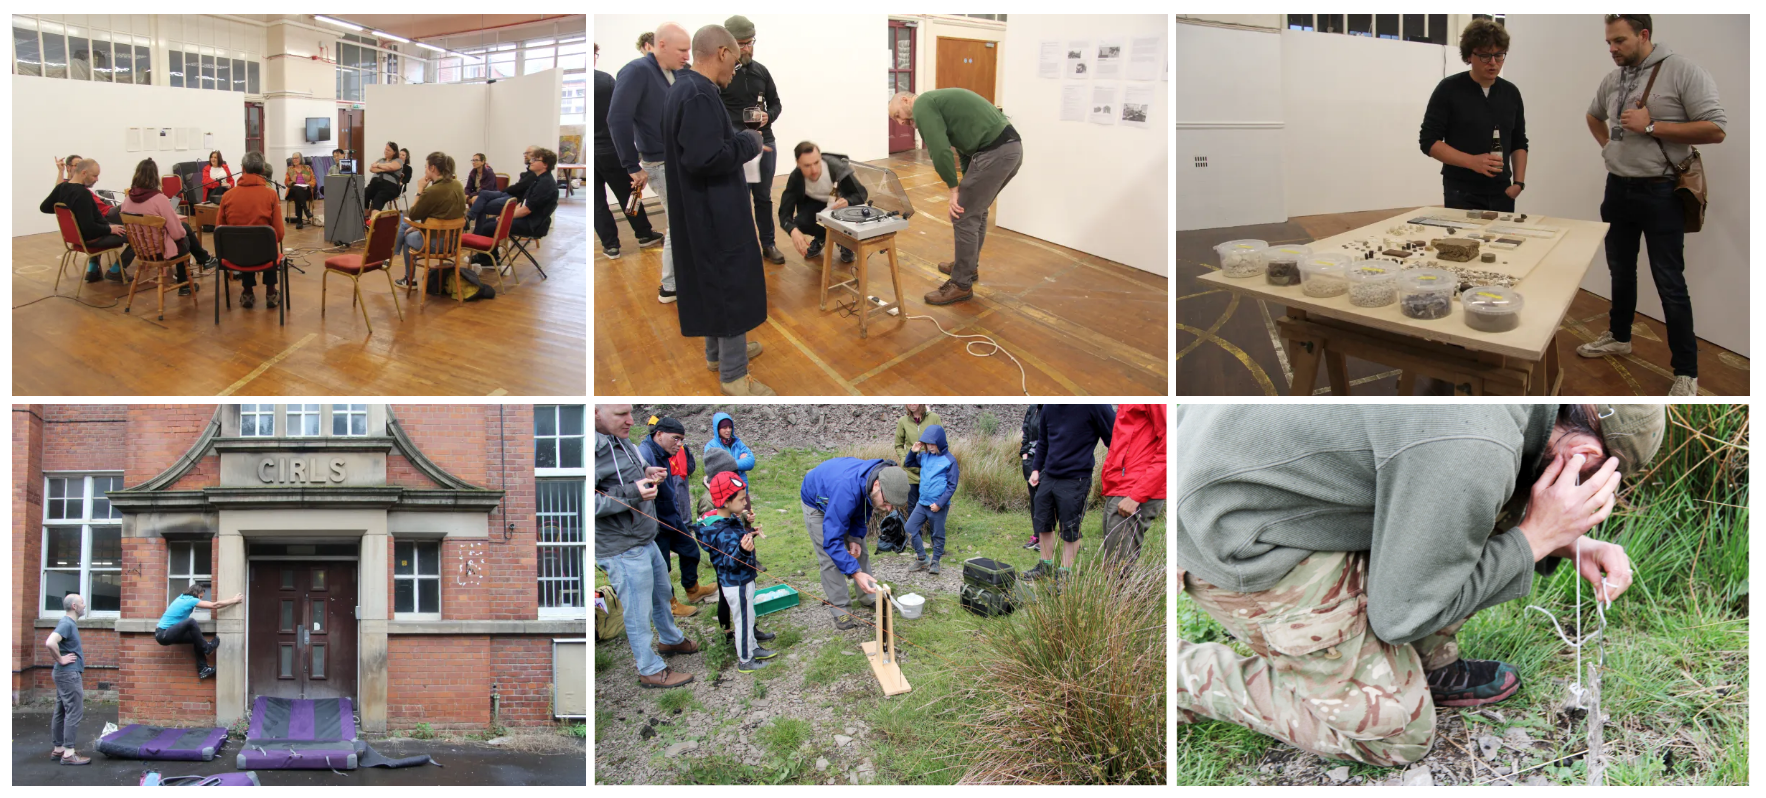 A grid of 6 images showing a range para-lab activities. The images include people sitting in a circle for a discussion, viewers looking at objects in a gallery, and experiments taking places outdoors.